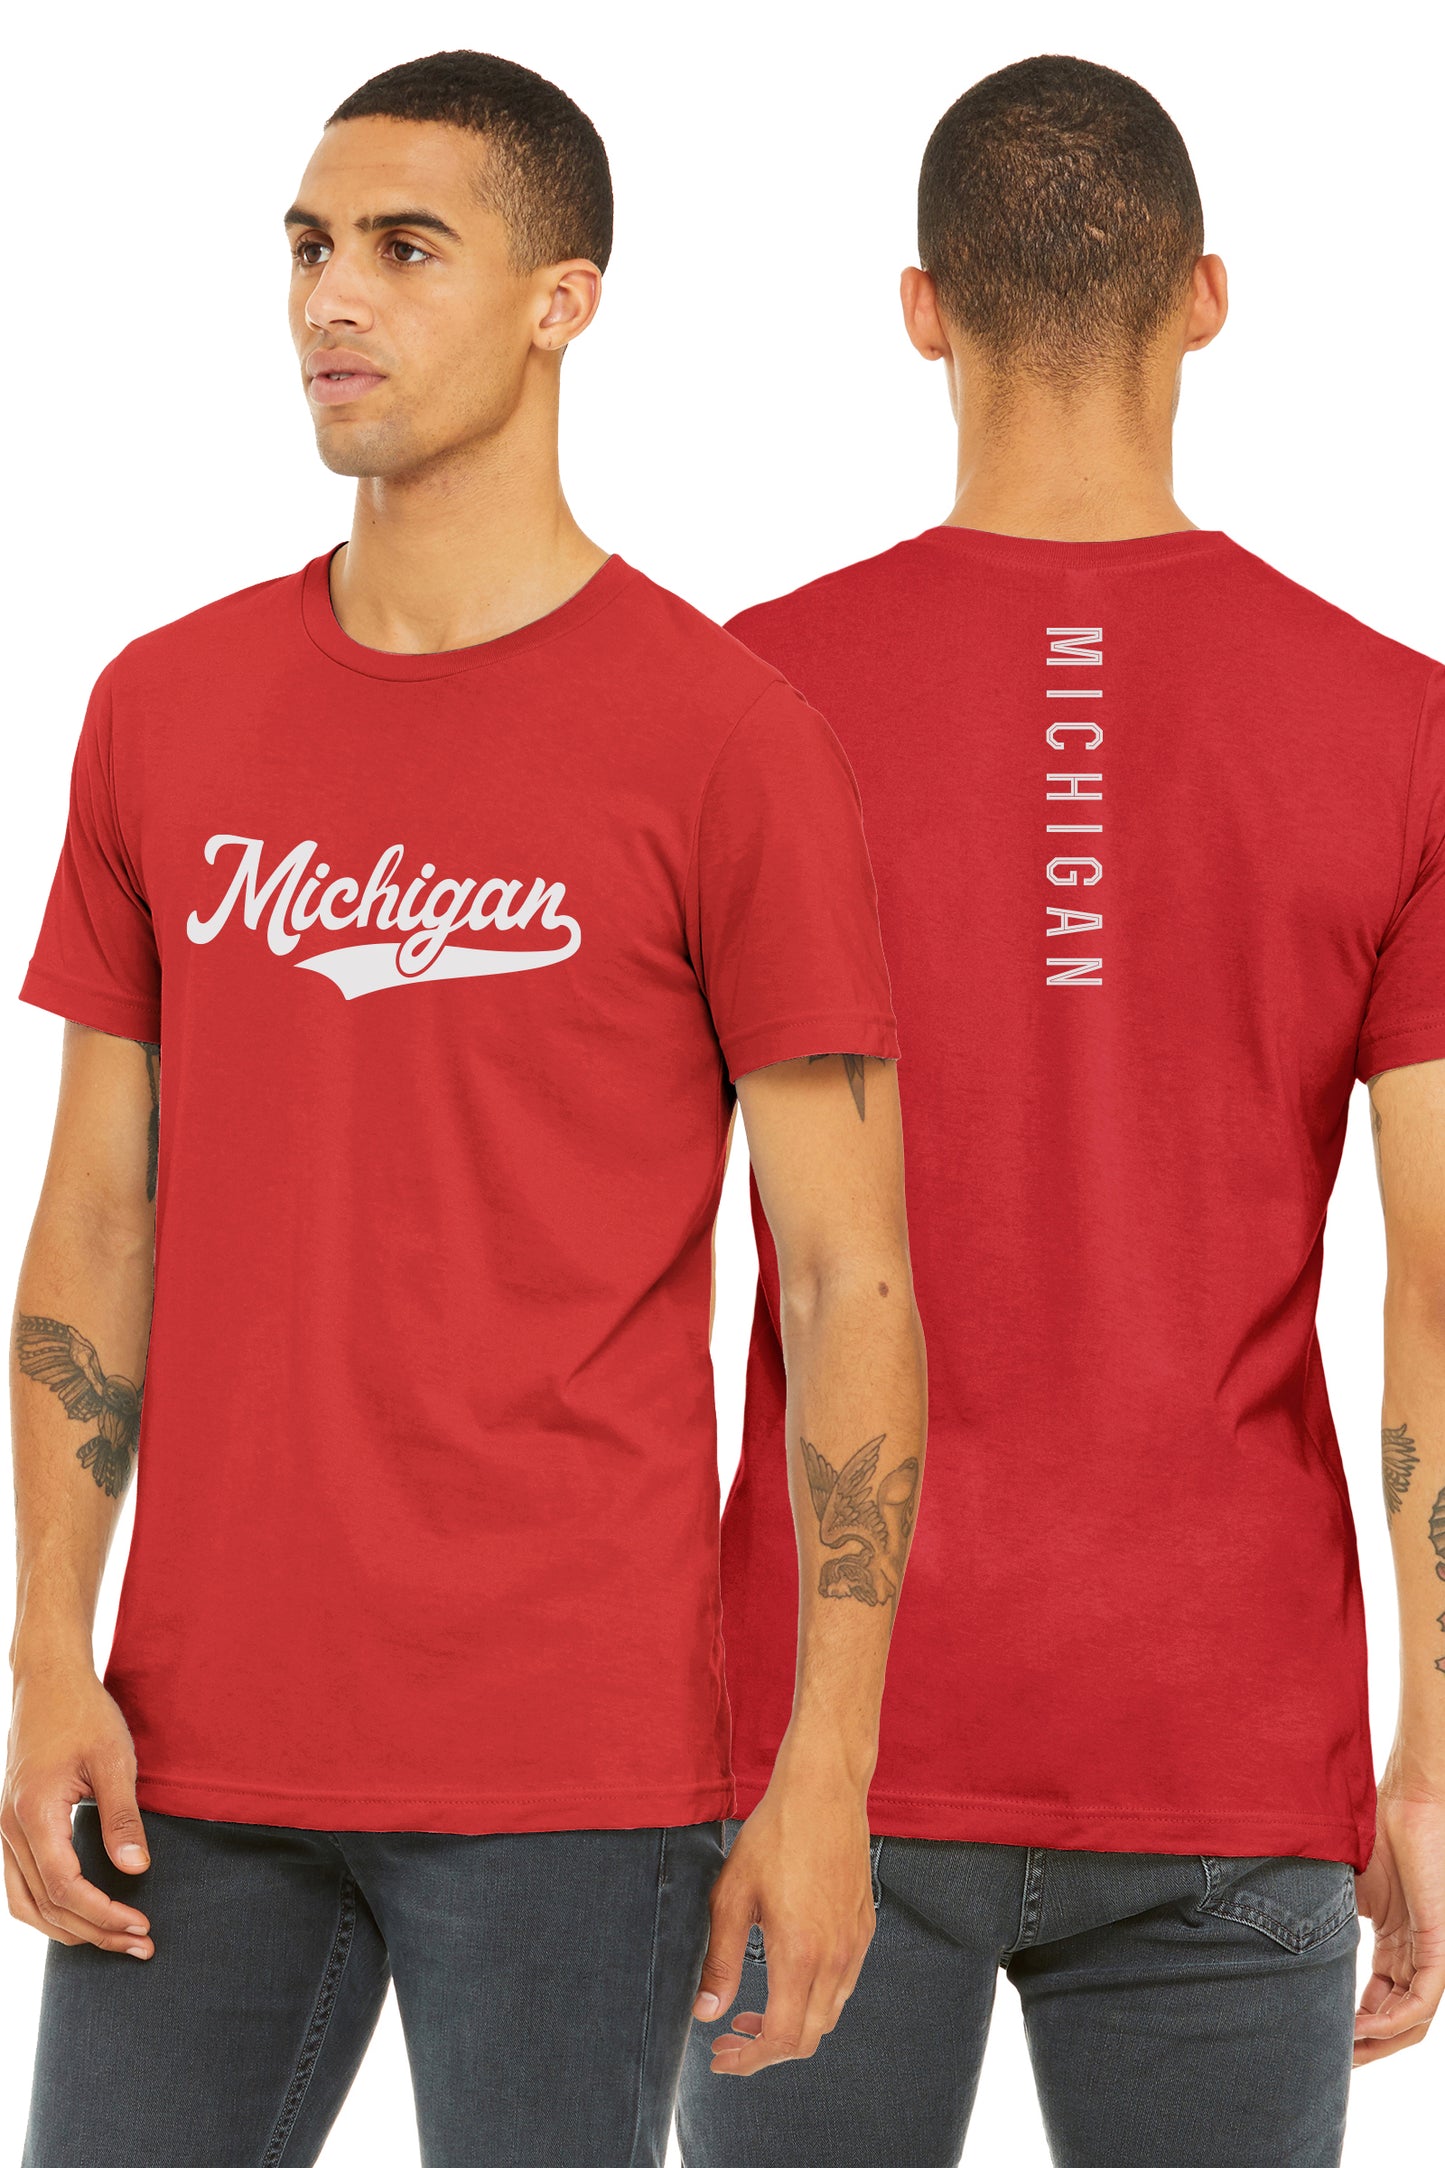 Daxton Adult Unisex Tshirt Michigan Script with Vertical on the Back